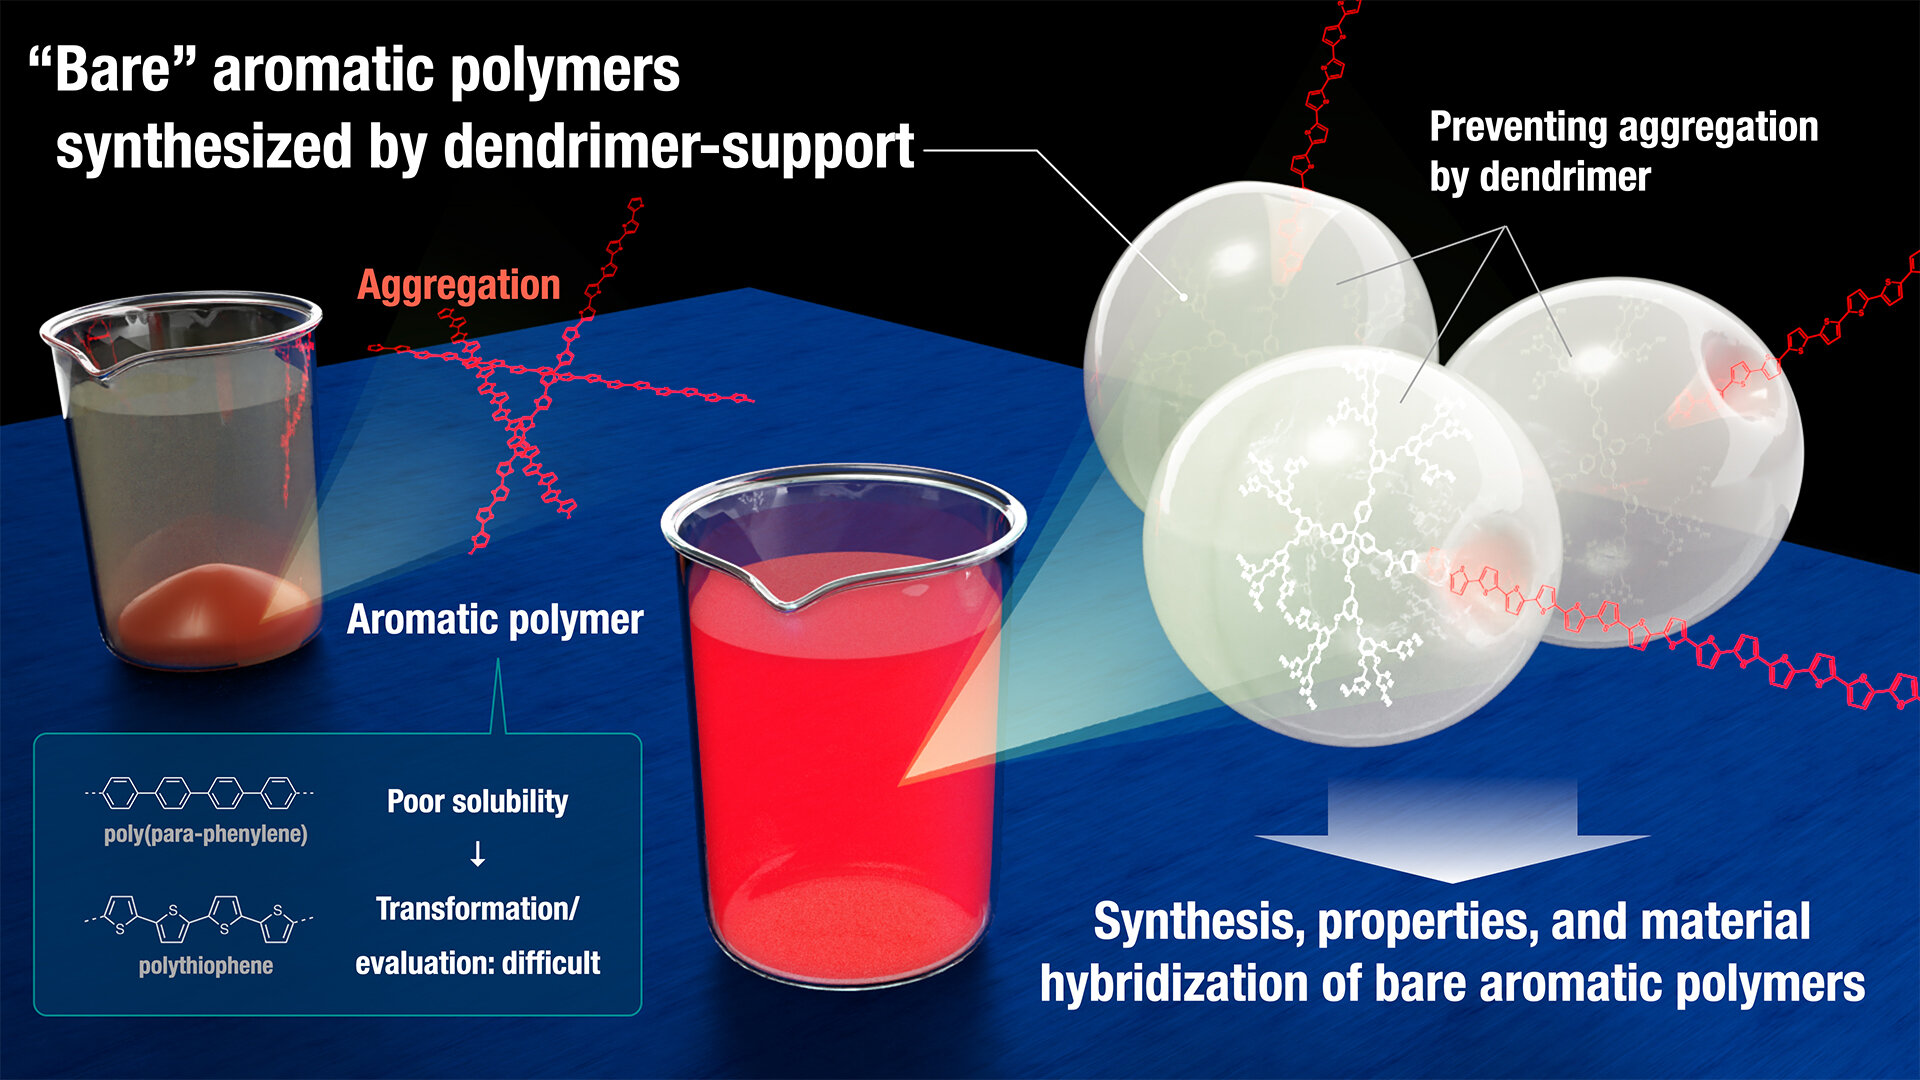 Synthesis of bare aromatic polymers with dendrimer support suggests the creation of unique hybrid materials